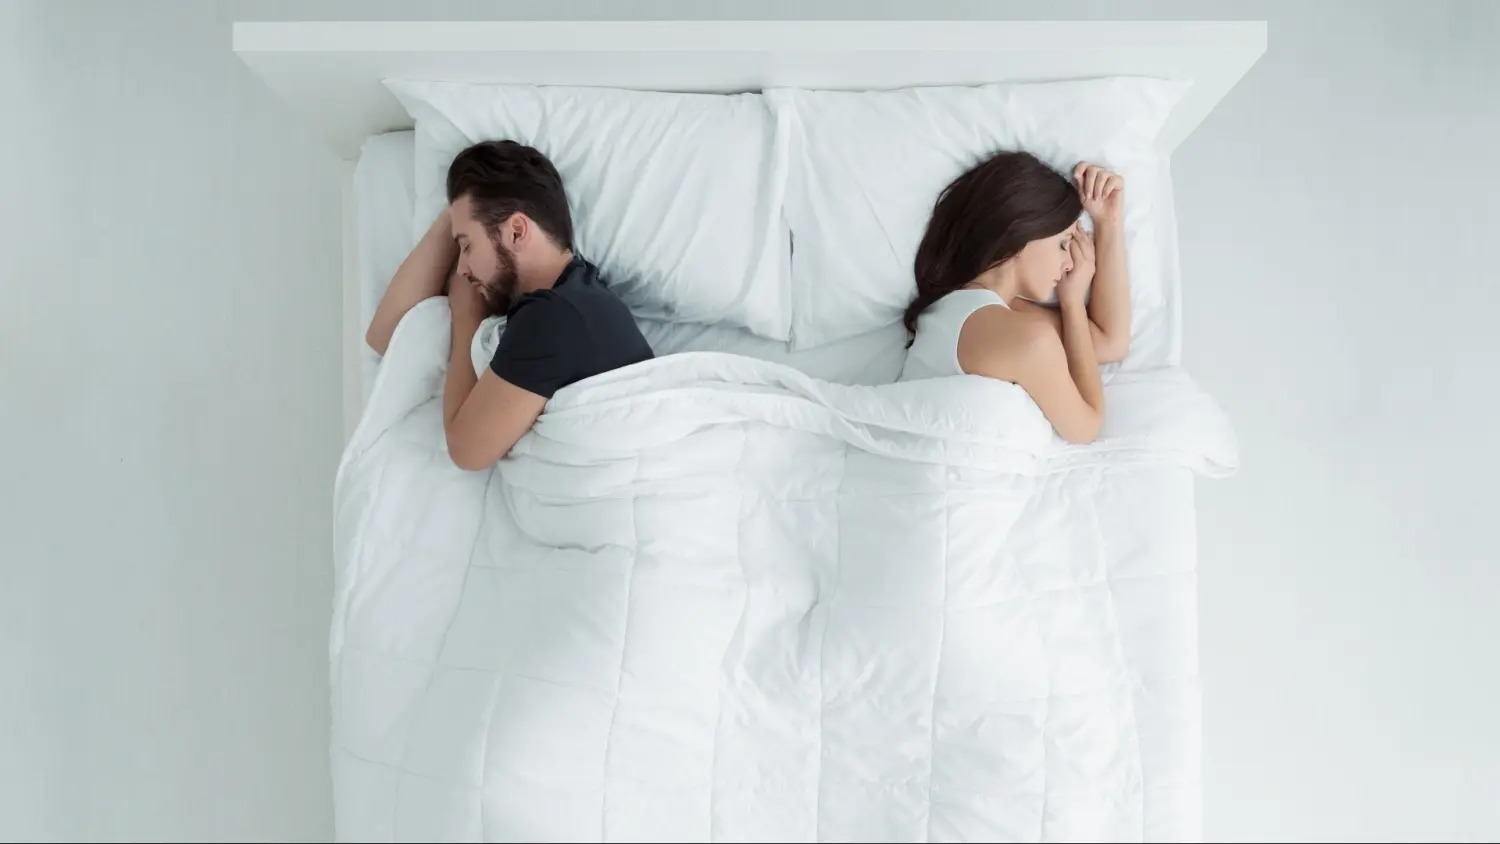 23-facts-about-sleep-divorce